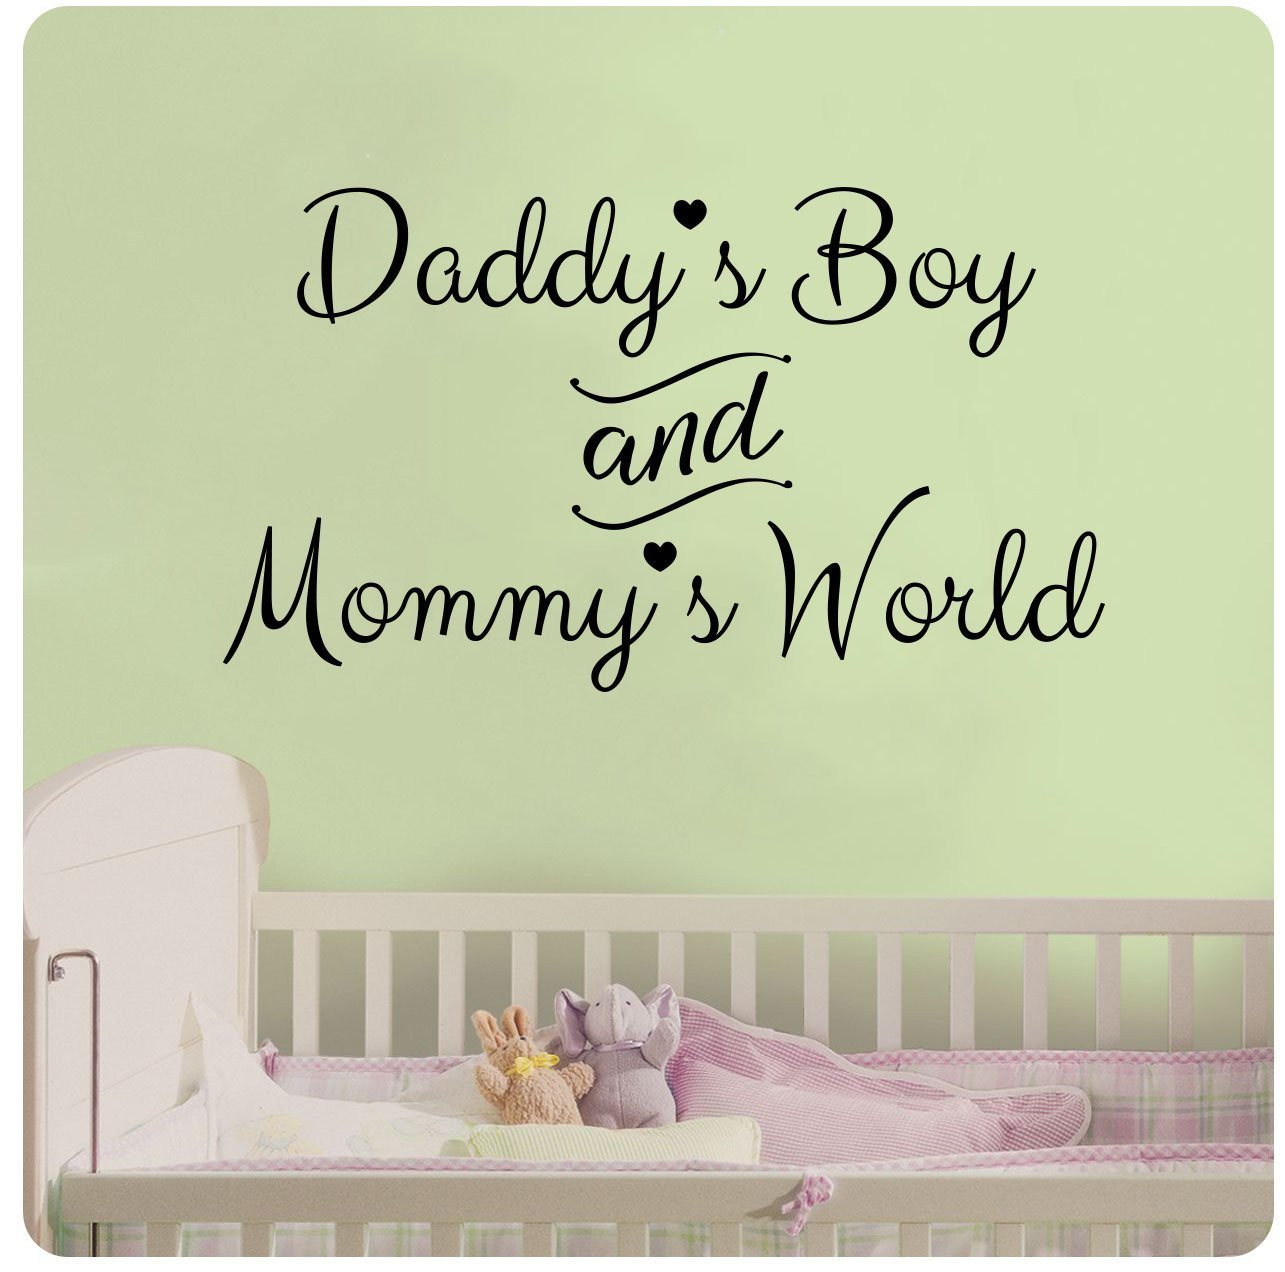 Quotes For Baby Room
 Amazon Baby Dreaming Wall Decal Quote Nursery Room